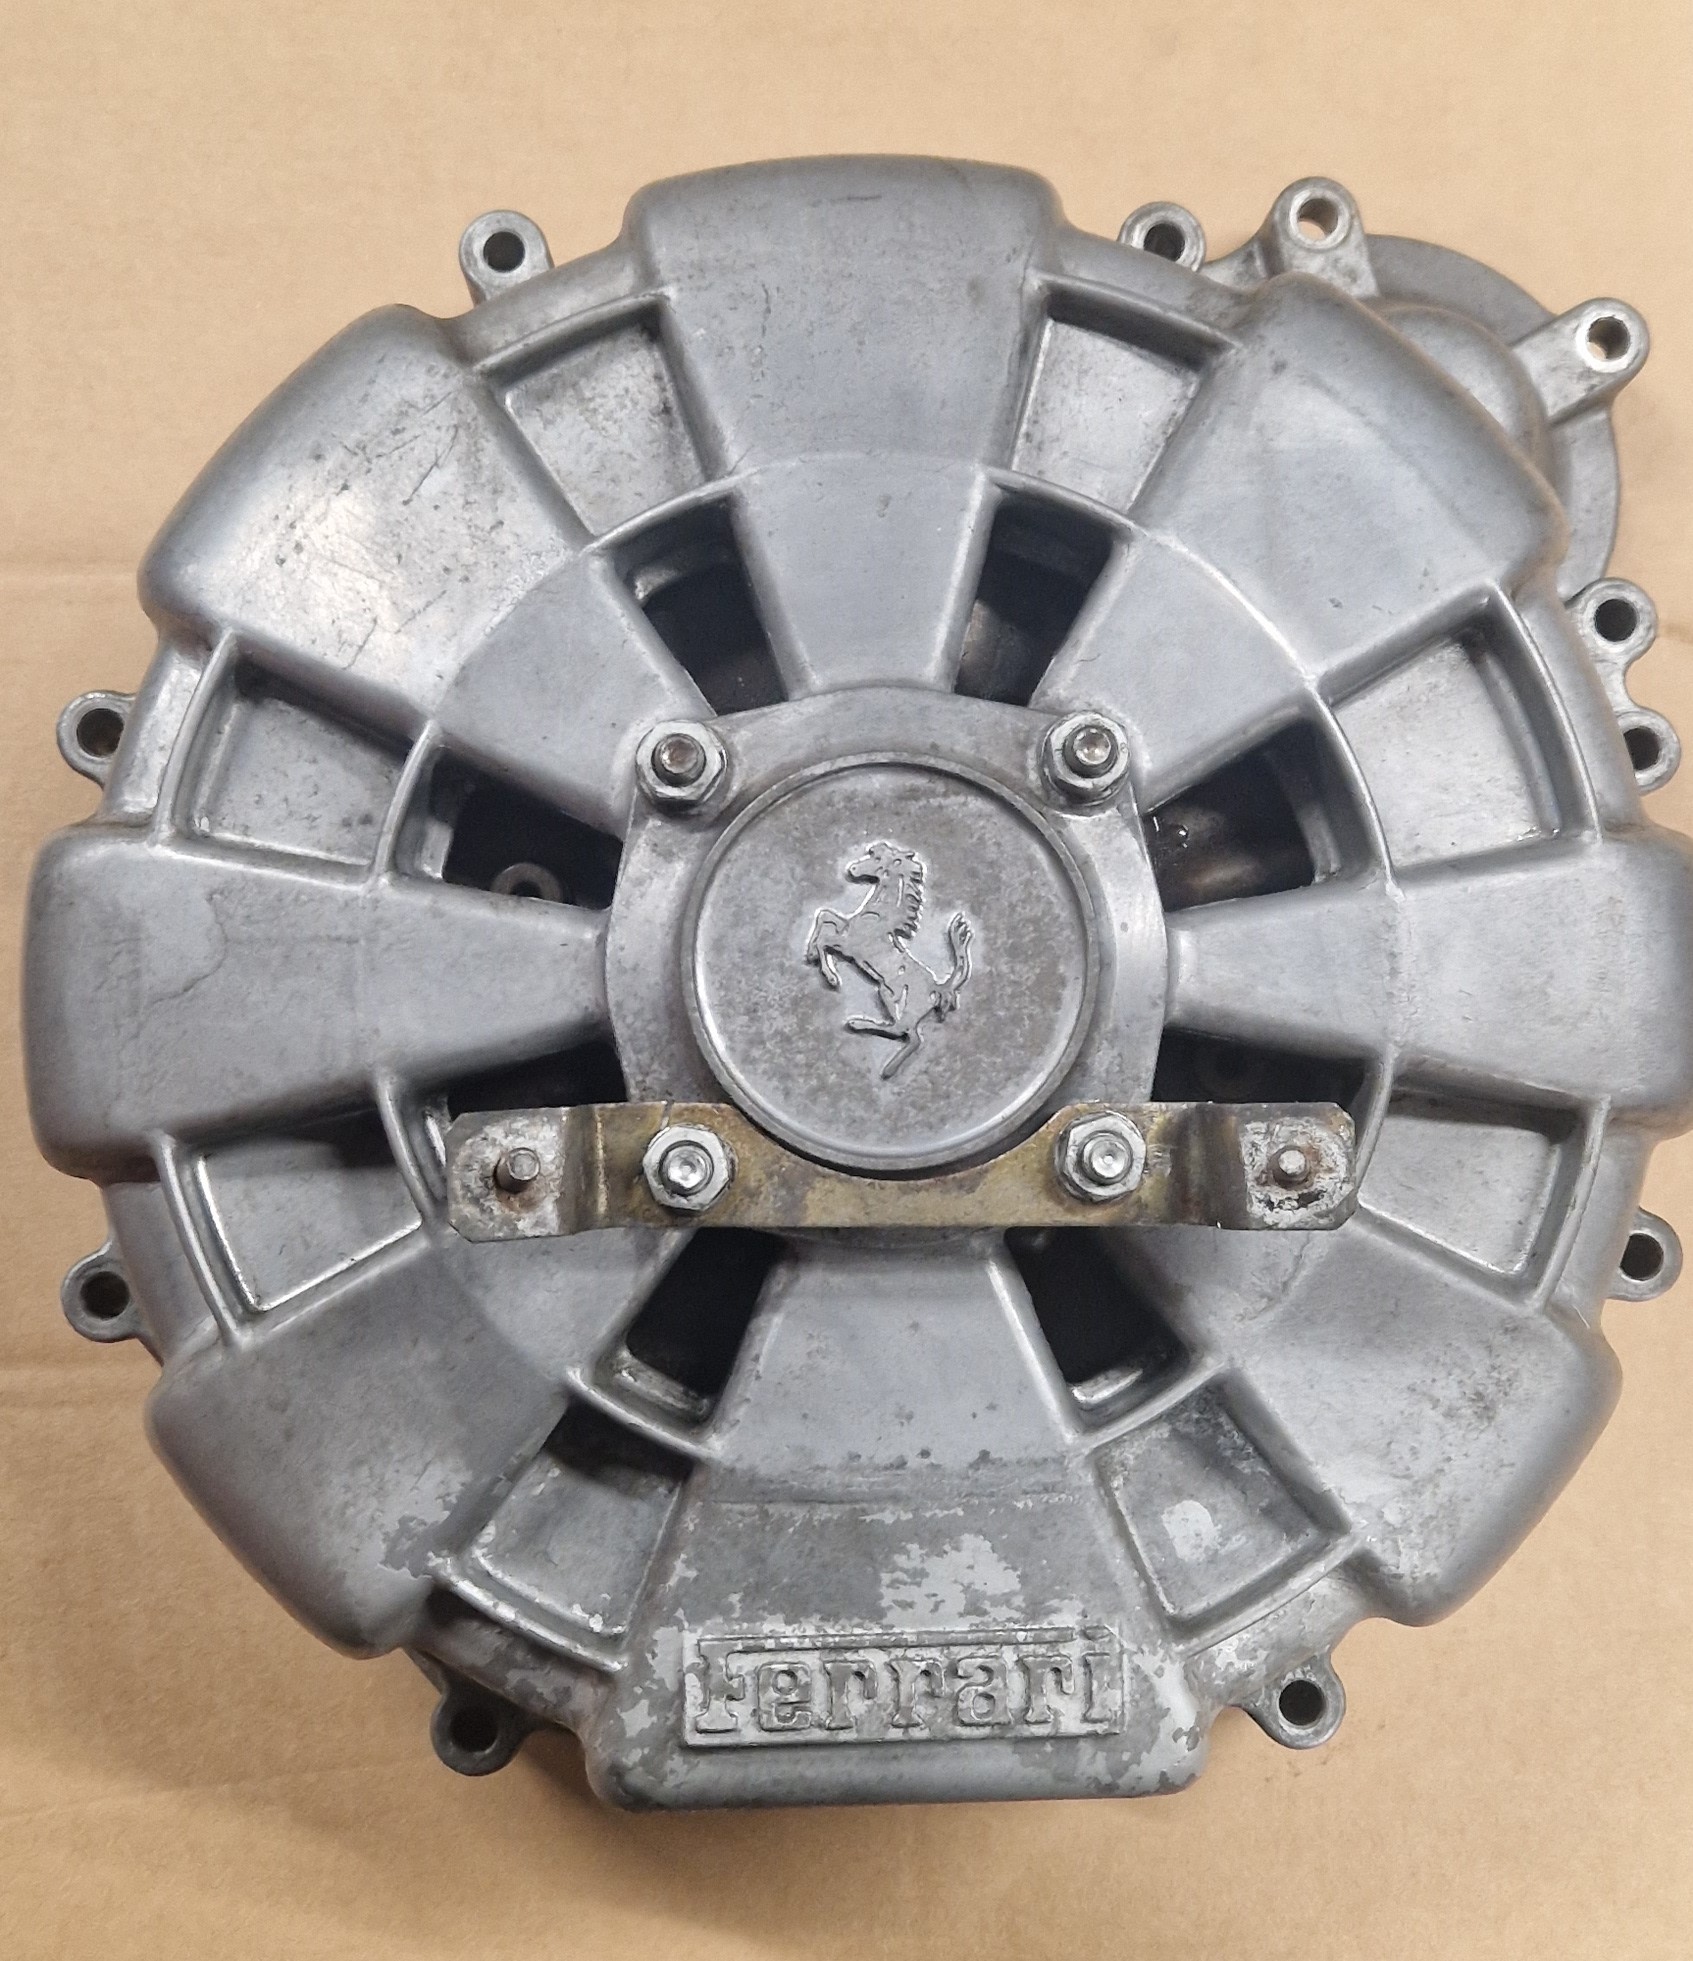 159507[164050] COMPLETE CLUTCH HOUSING WITH FLYWHEEL (Used)